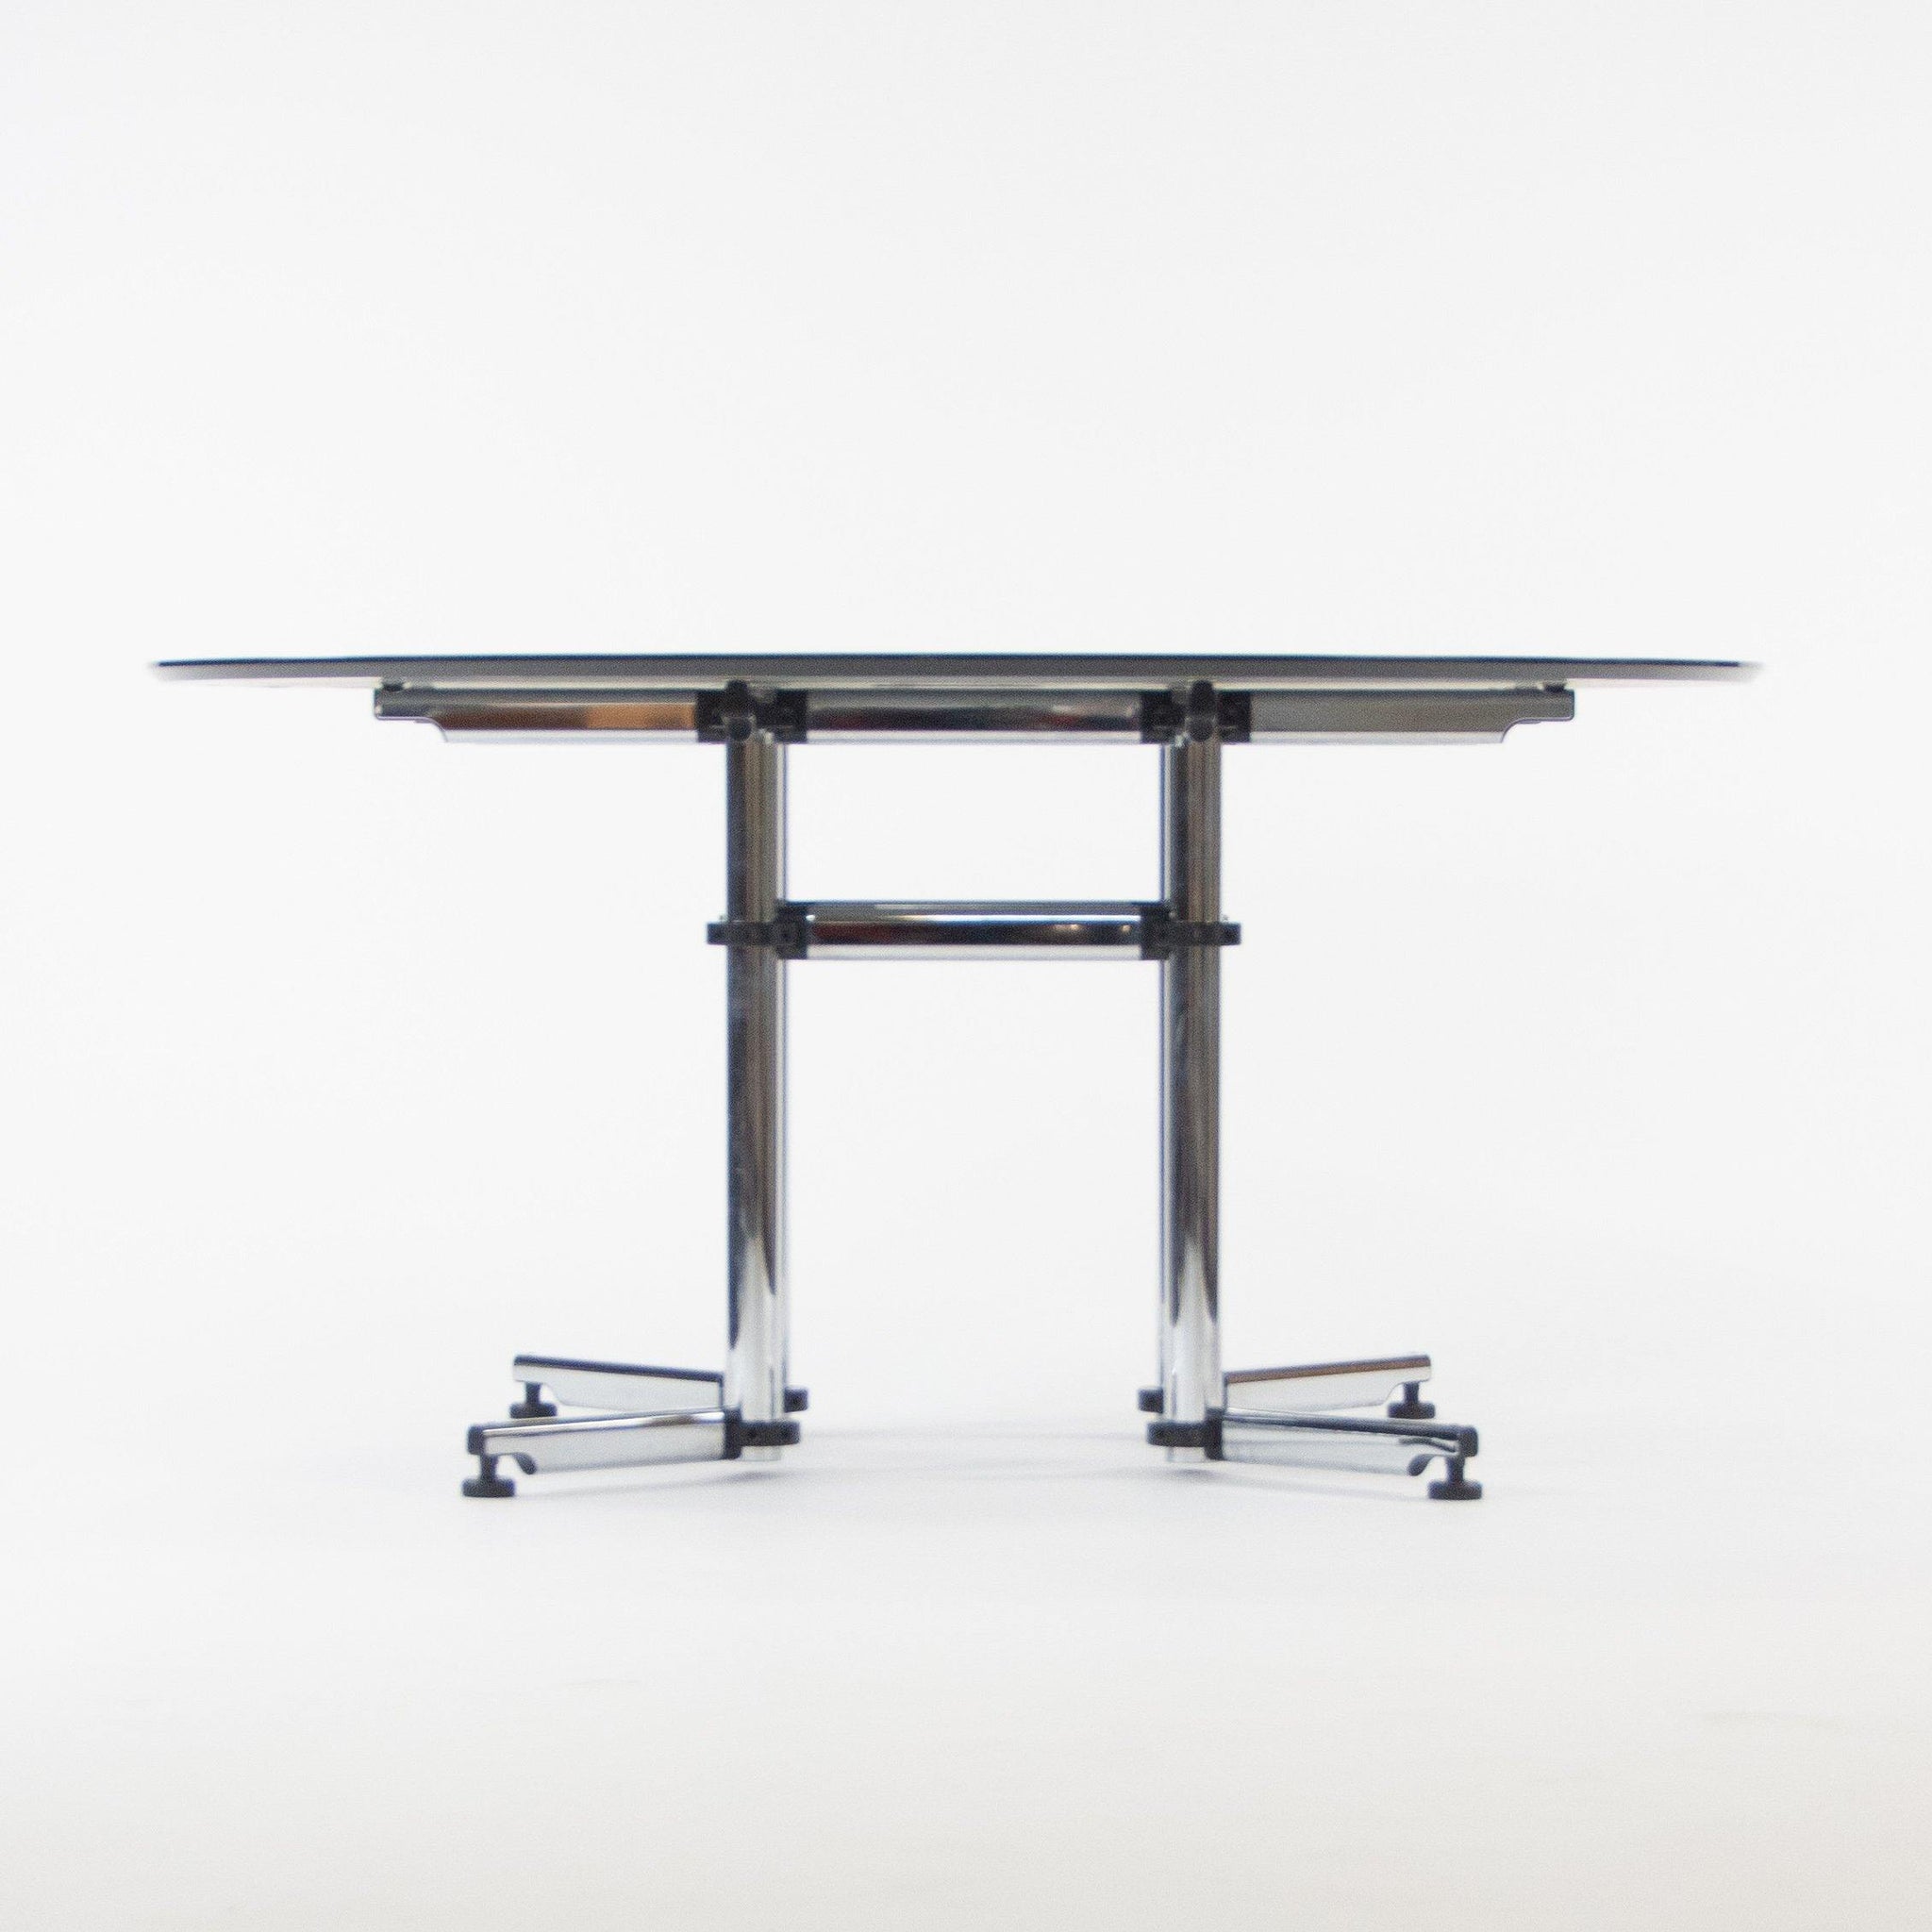 Kitos by USM Haller 60 Inch Round Black Marble Meeting Conference Office Table - Rarify Inc.